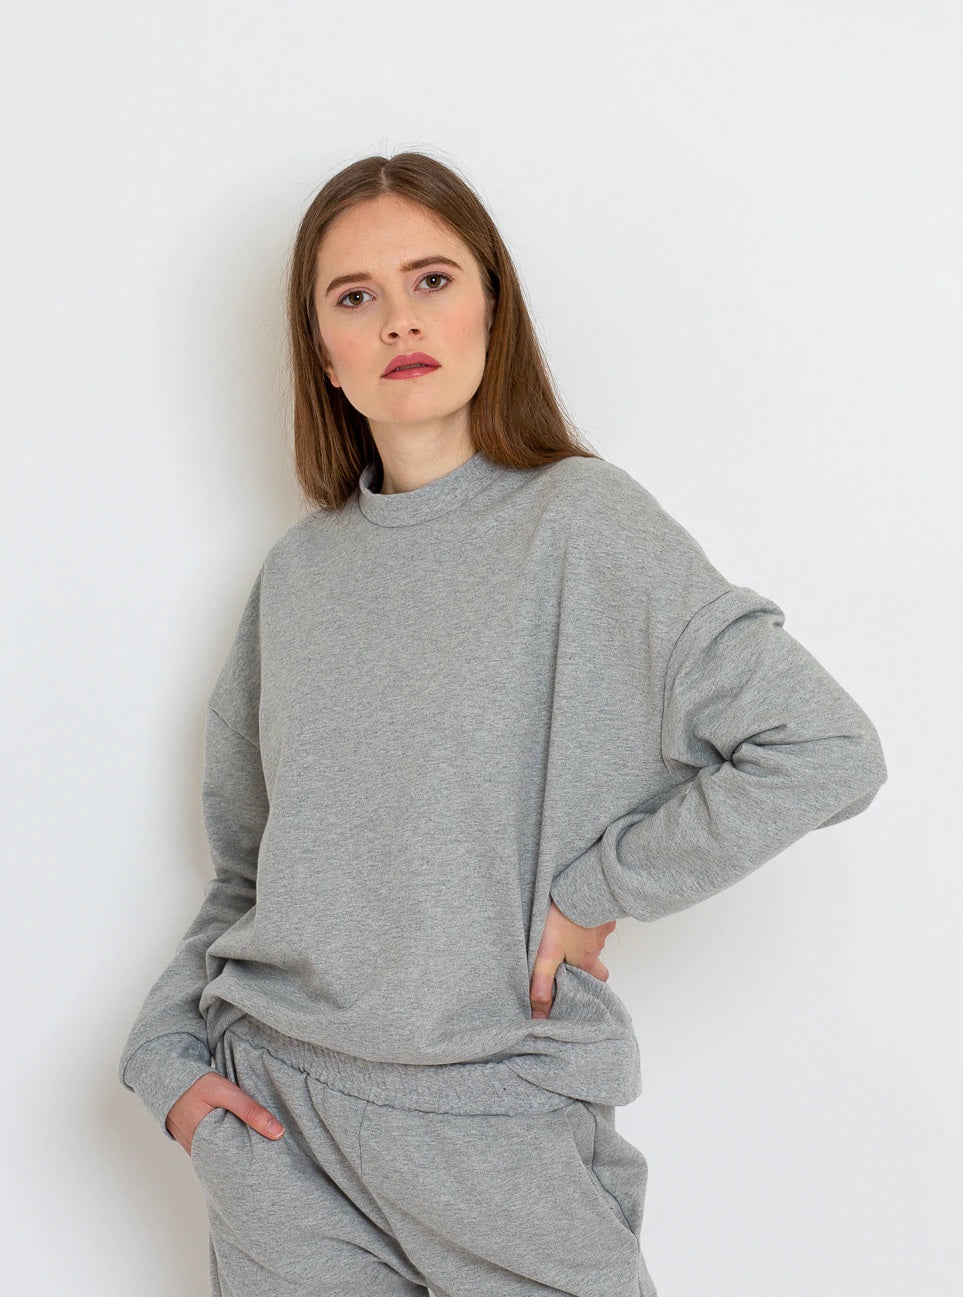 Woman wearing the Hanna Sweater sewing pattern from Bara Studio on The Fold Line. A sweater pattern made in medium-weight stretch fabrics such as sweat or French terry fabrics, featuring an oversized silhouette, dropped shoulders, ribbed neckline, hem and